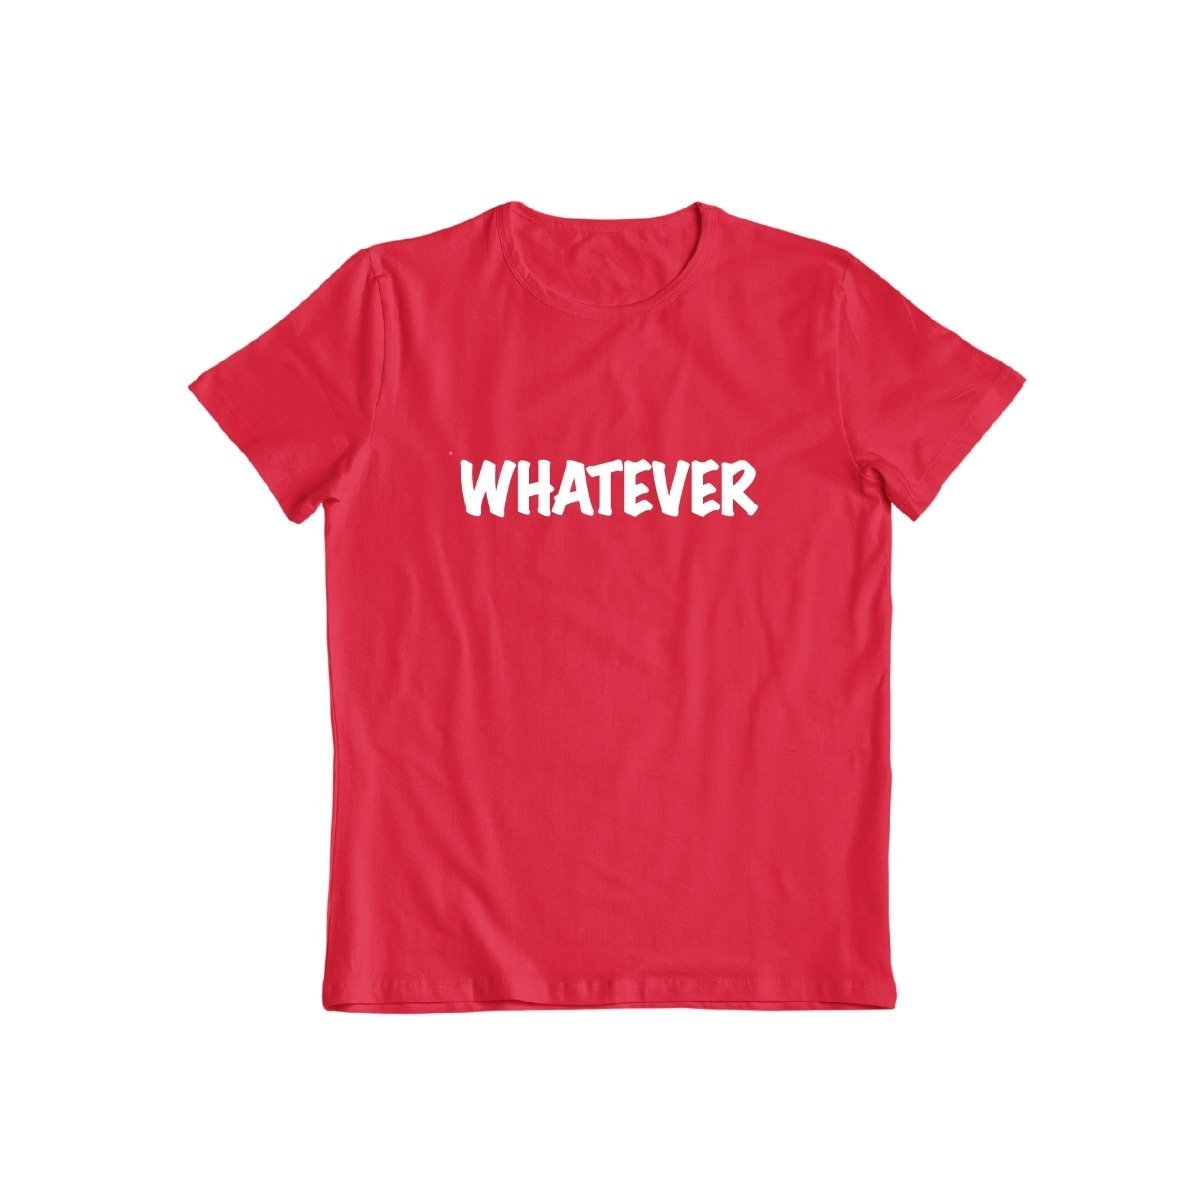 Whatever T-Shirt for Men and Women / Red / 2XL